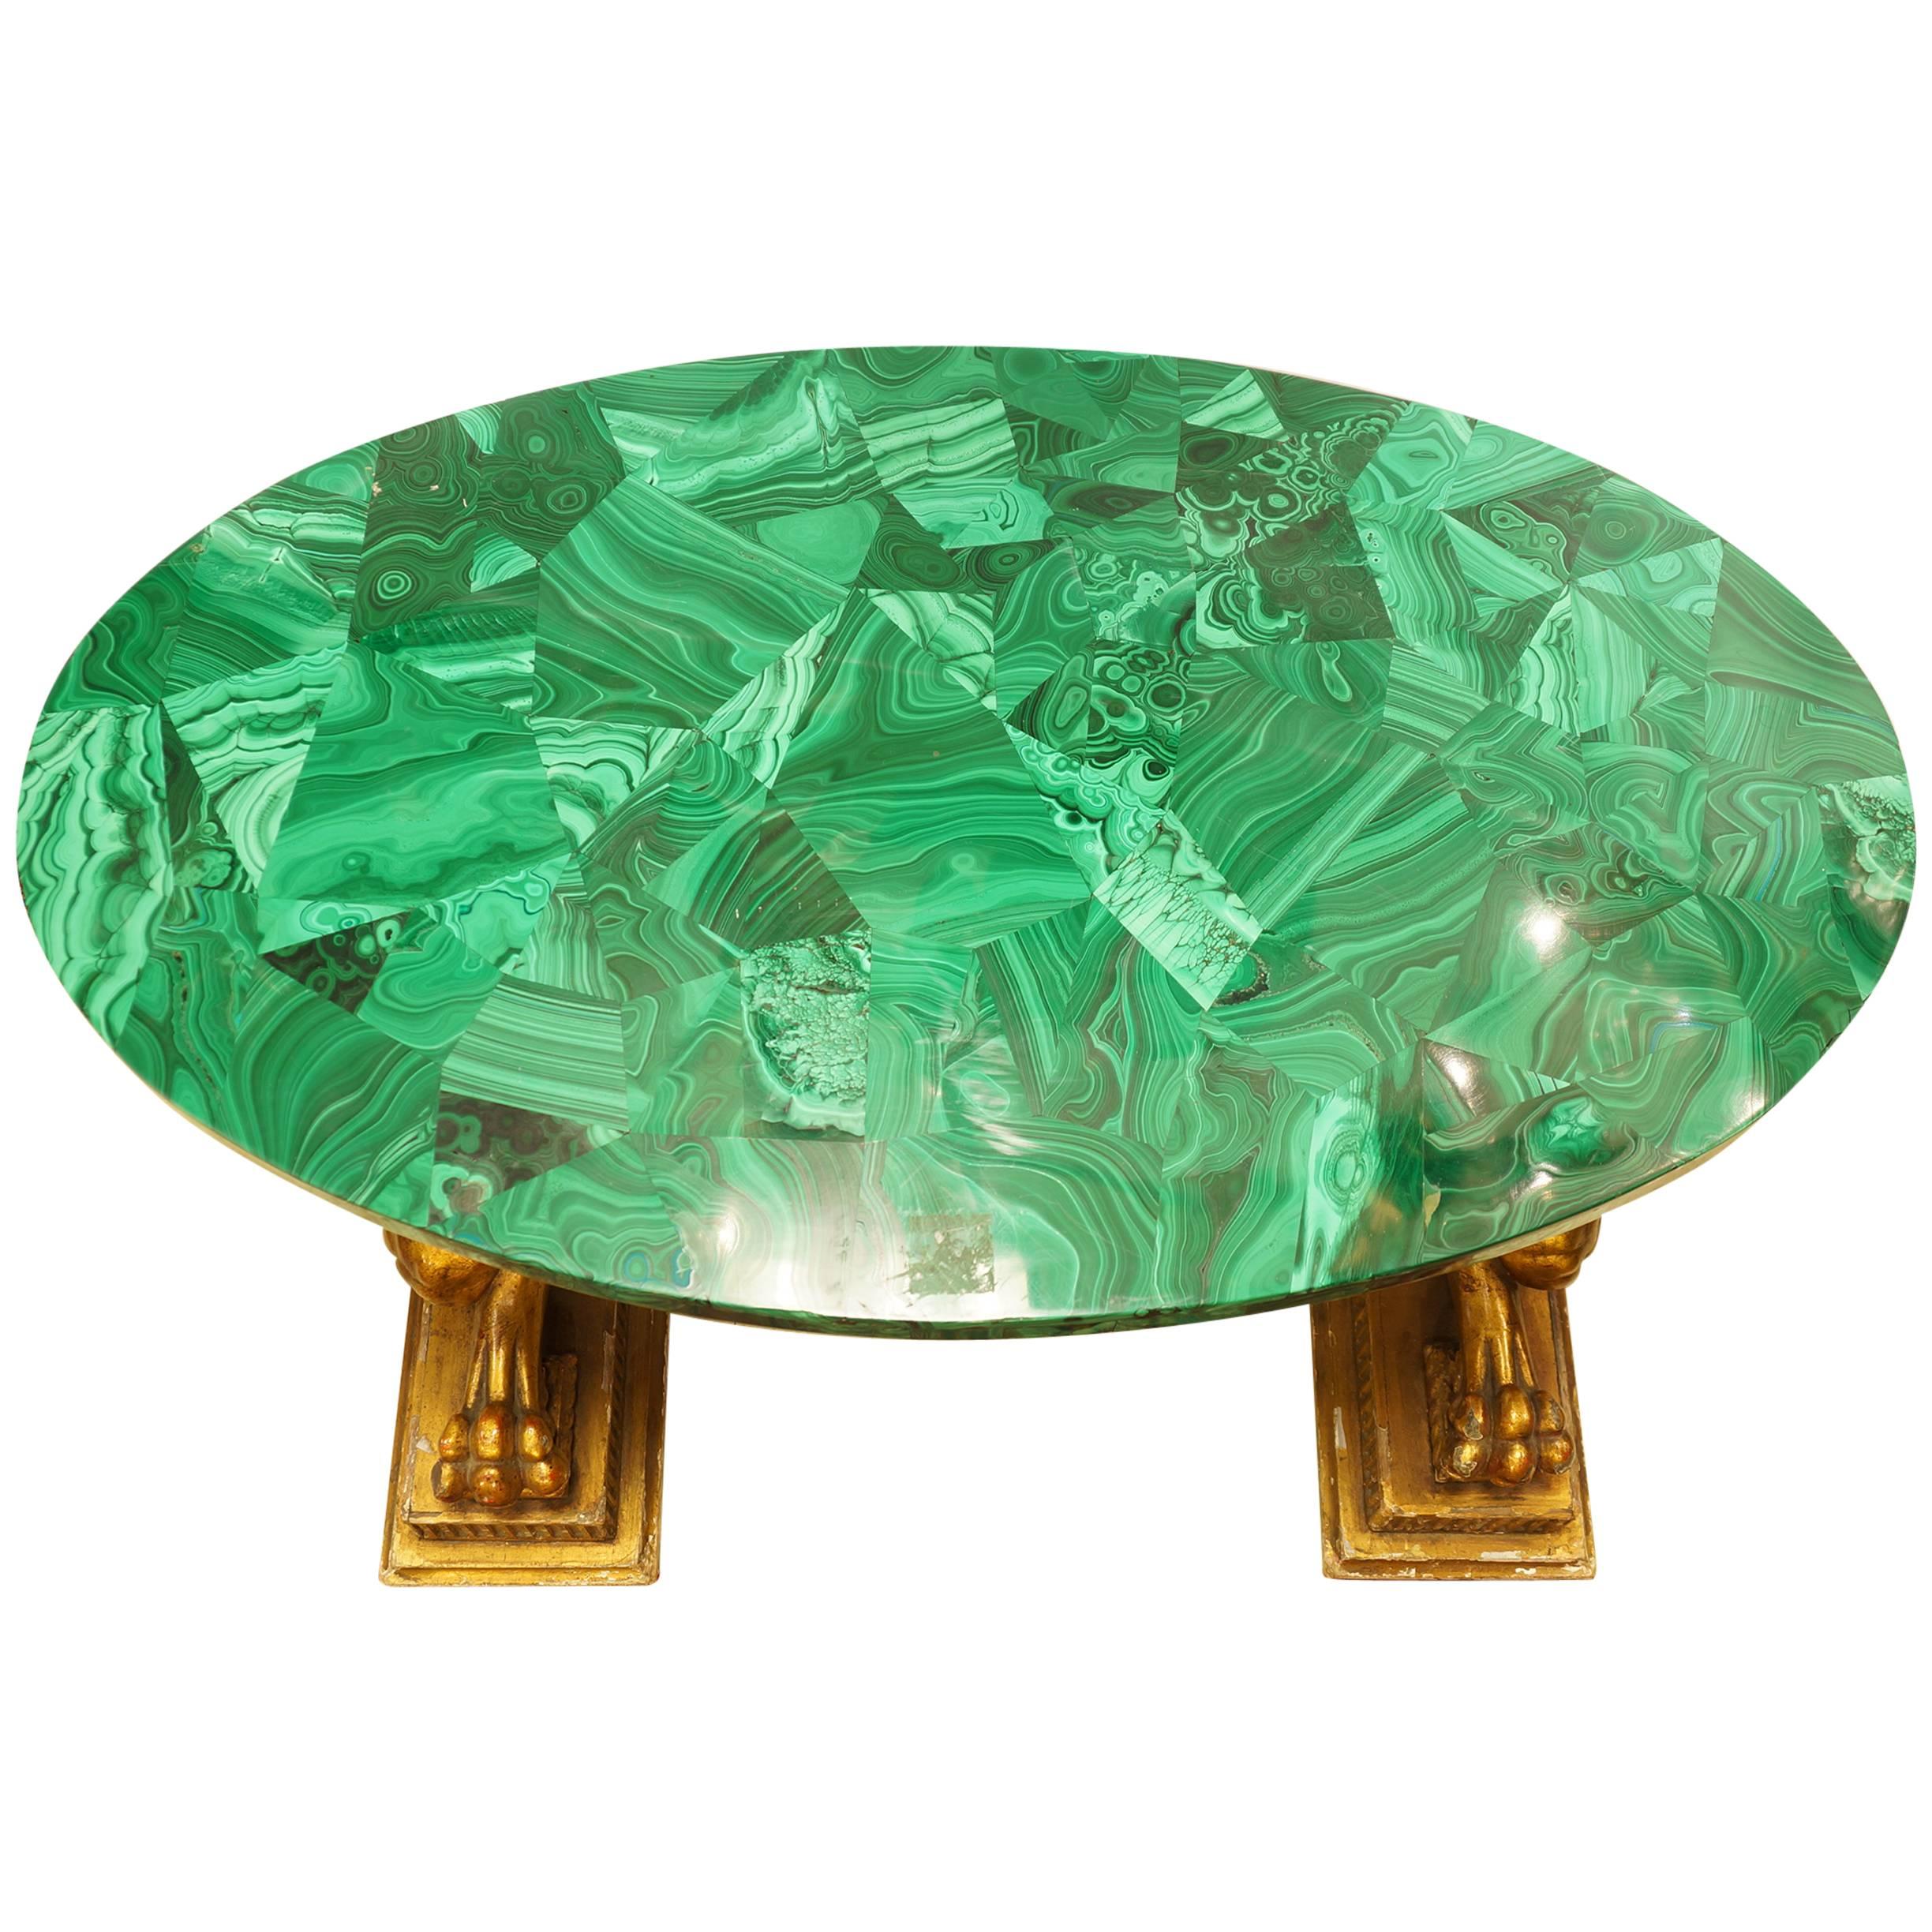 Magnificent Green Malachite Low Coffee Table on a Figural Giltwood Base